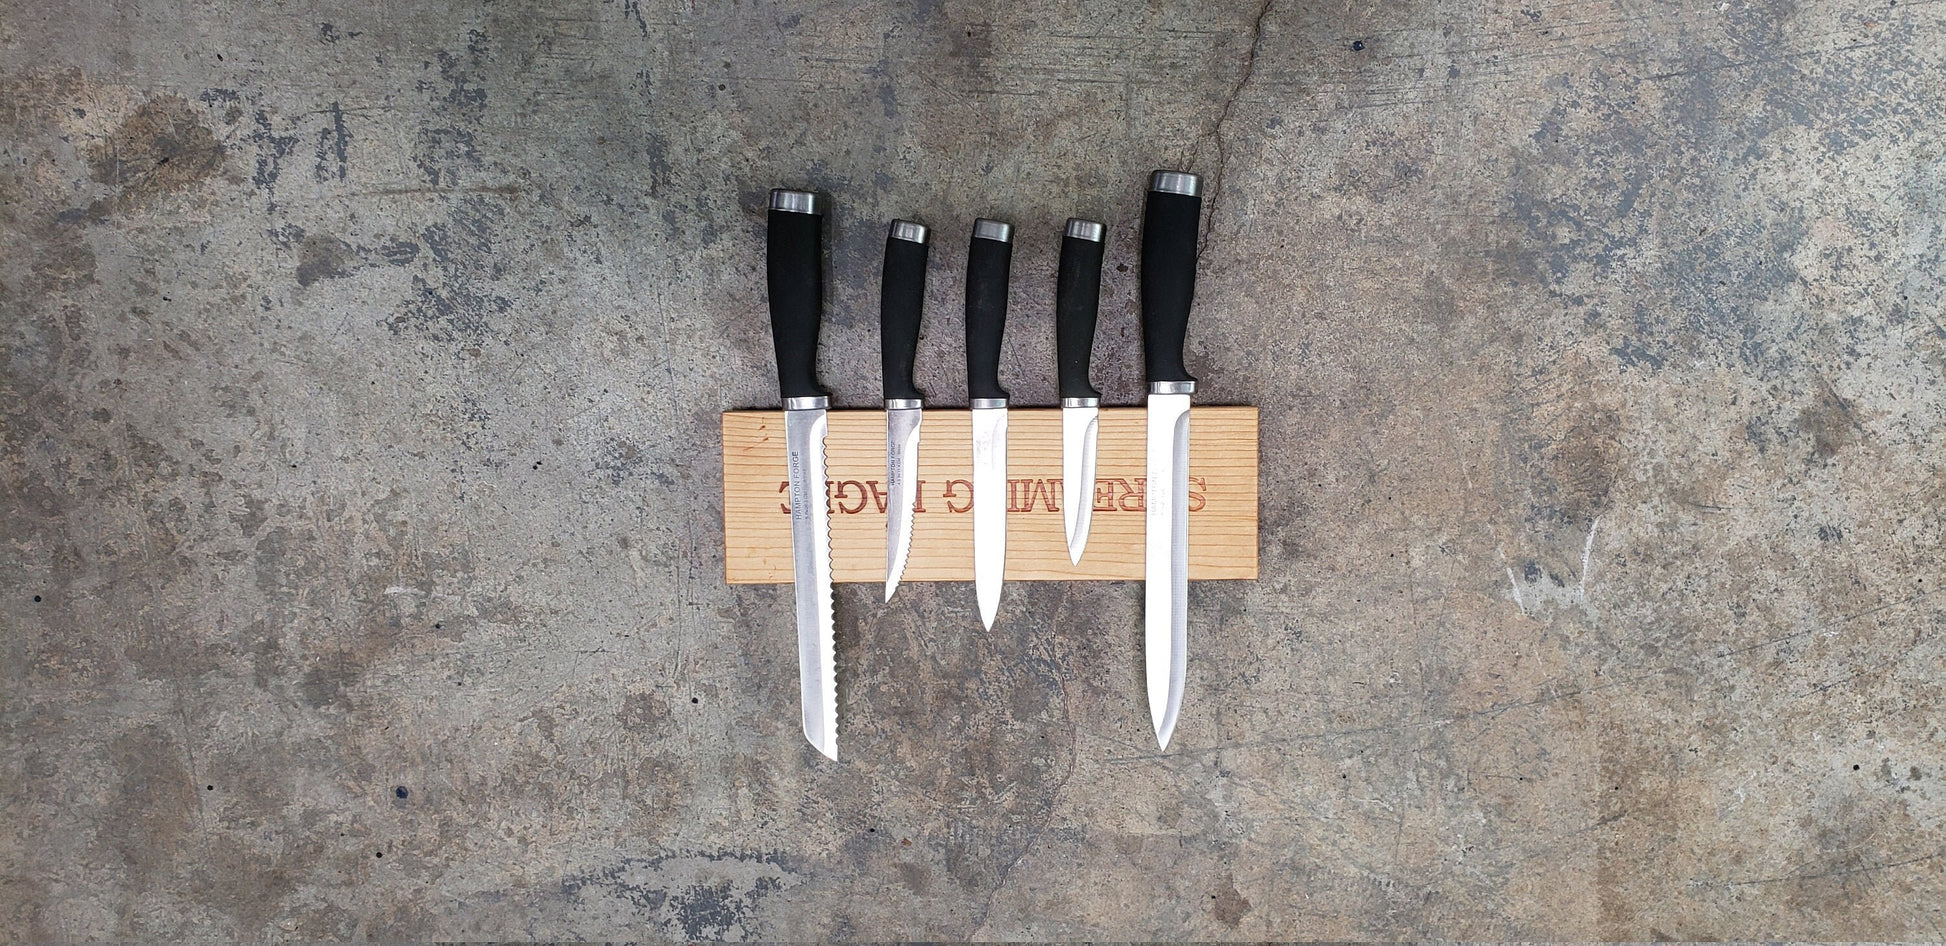 Wine Crate Magnetic Knife Rack - 0263 - Made from Retired Screaming Eagle Winery Box. 100% Recycled!